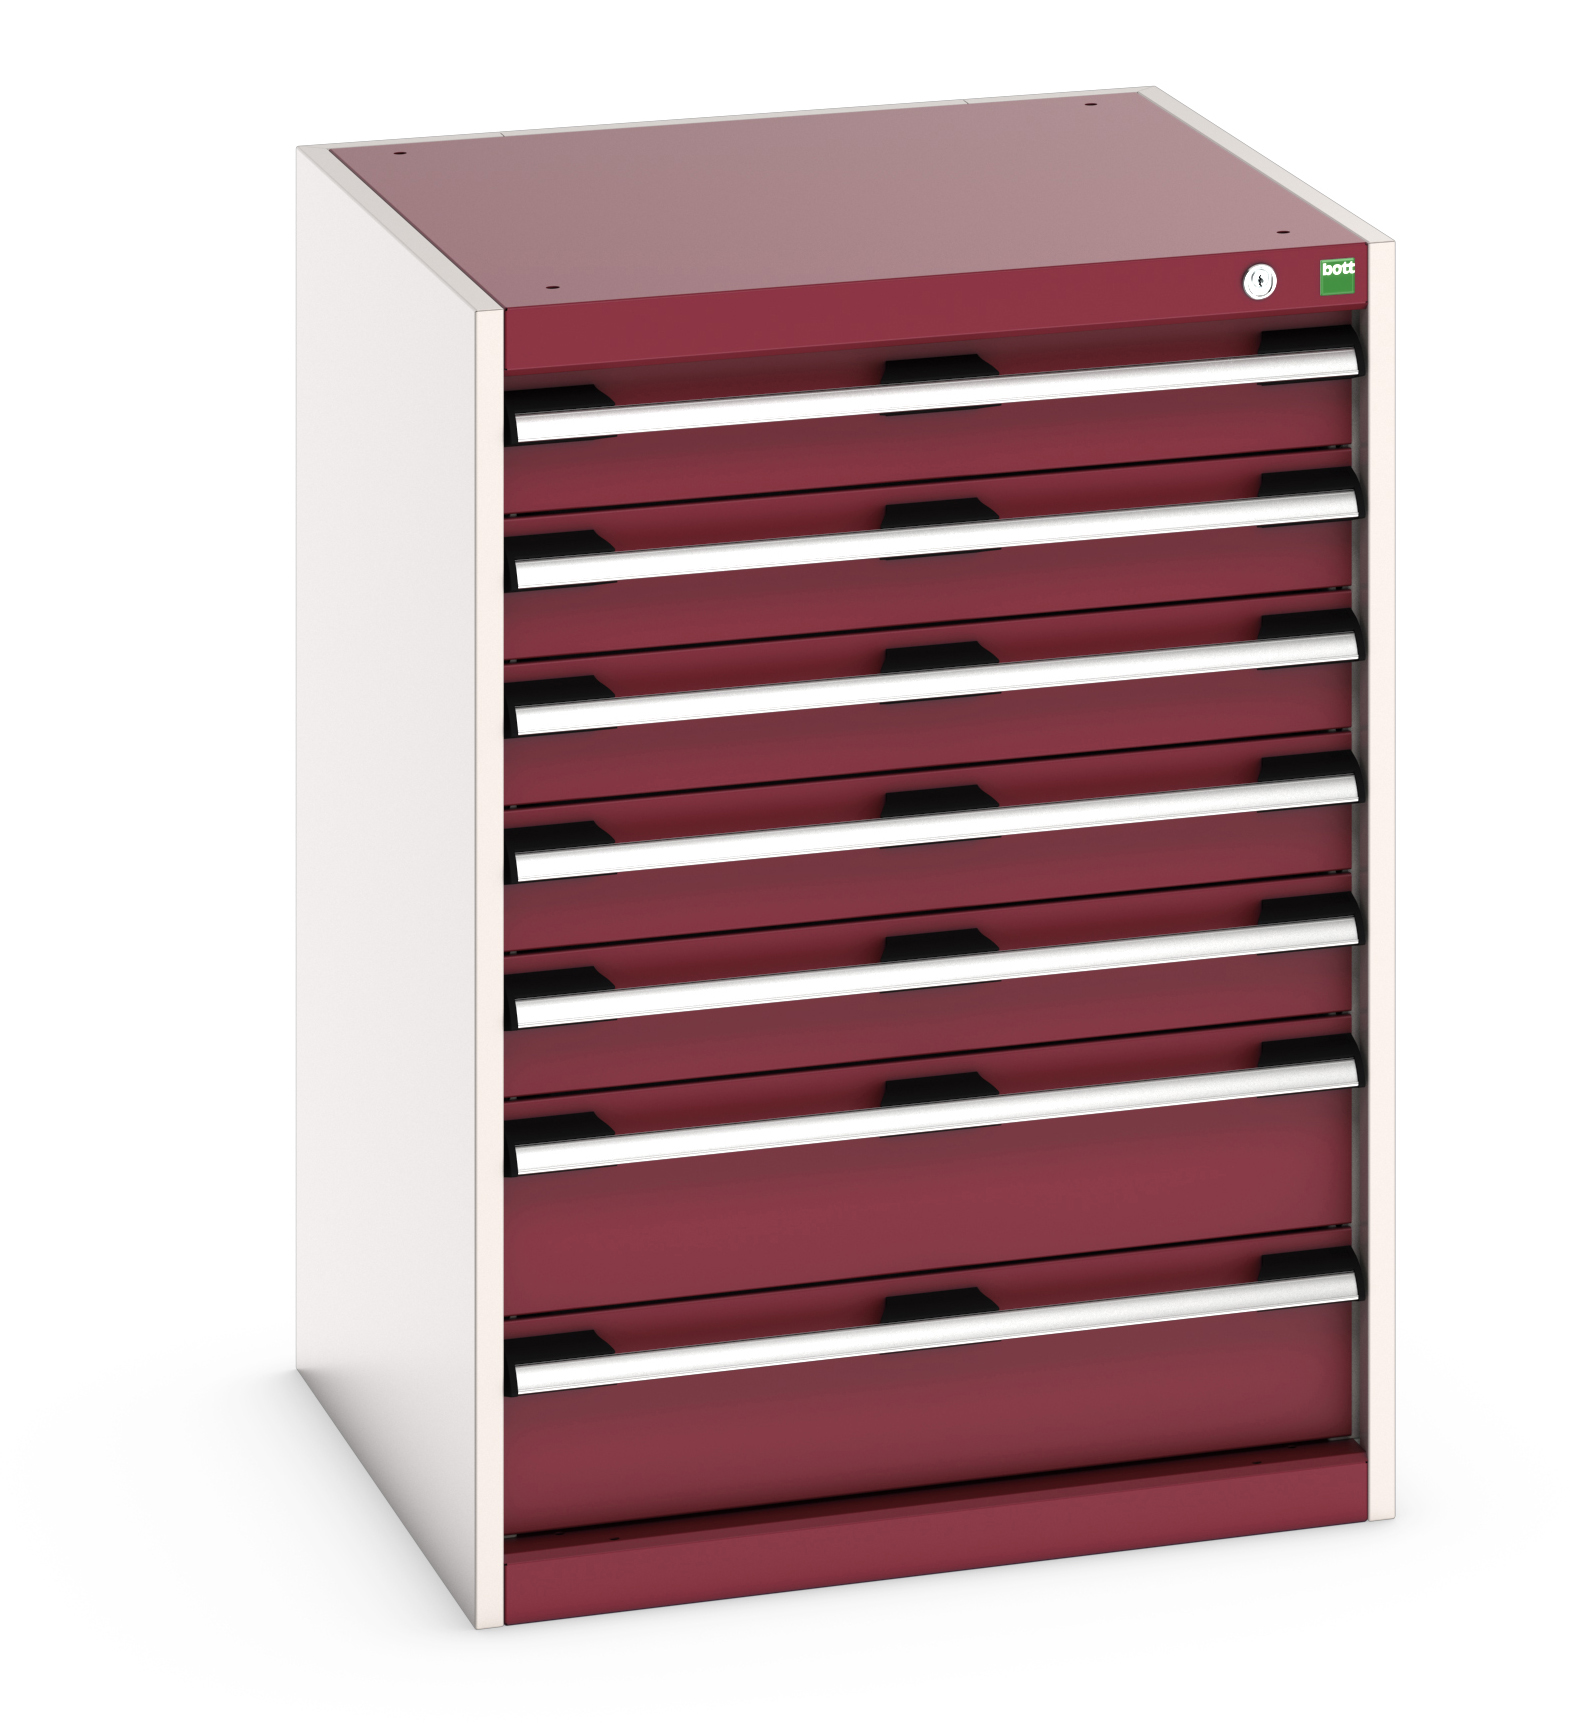 Bott Cubio Drawer Cabinet With 7 Drawers - 40019051.24V